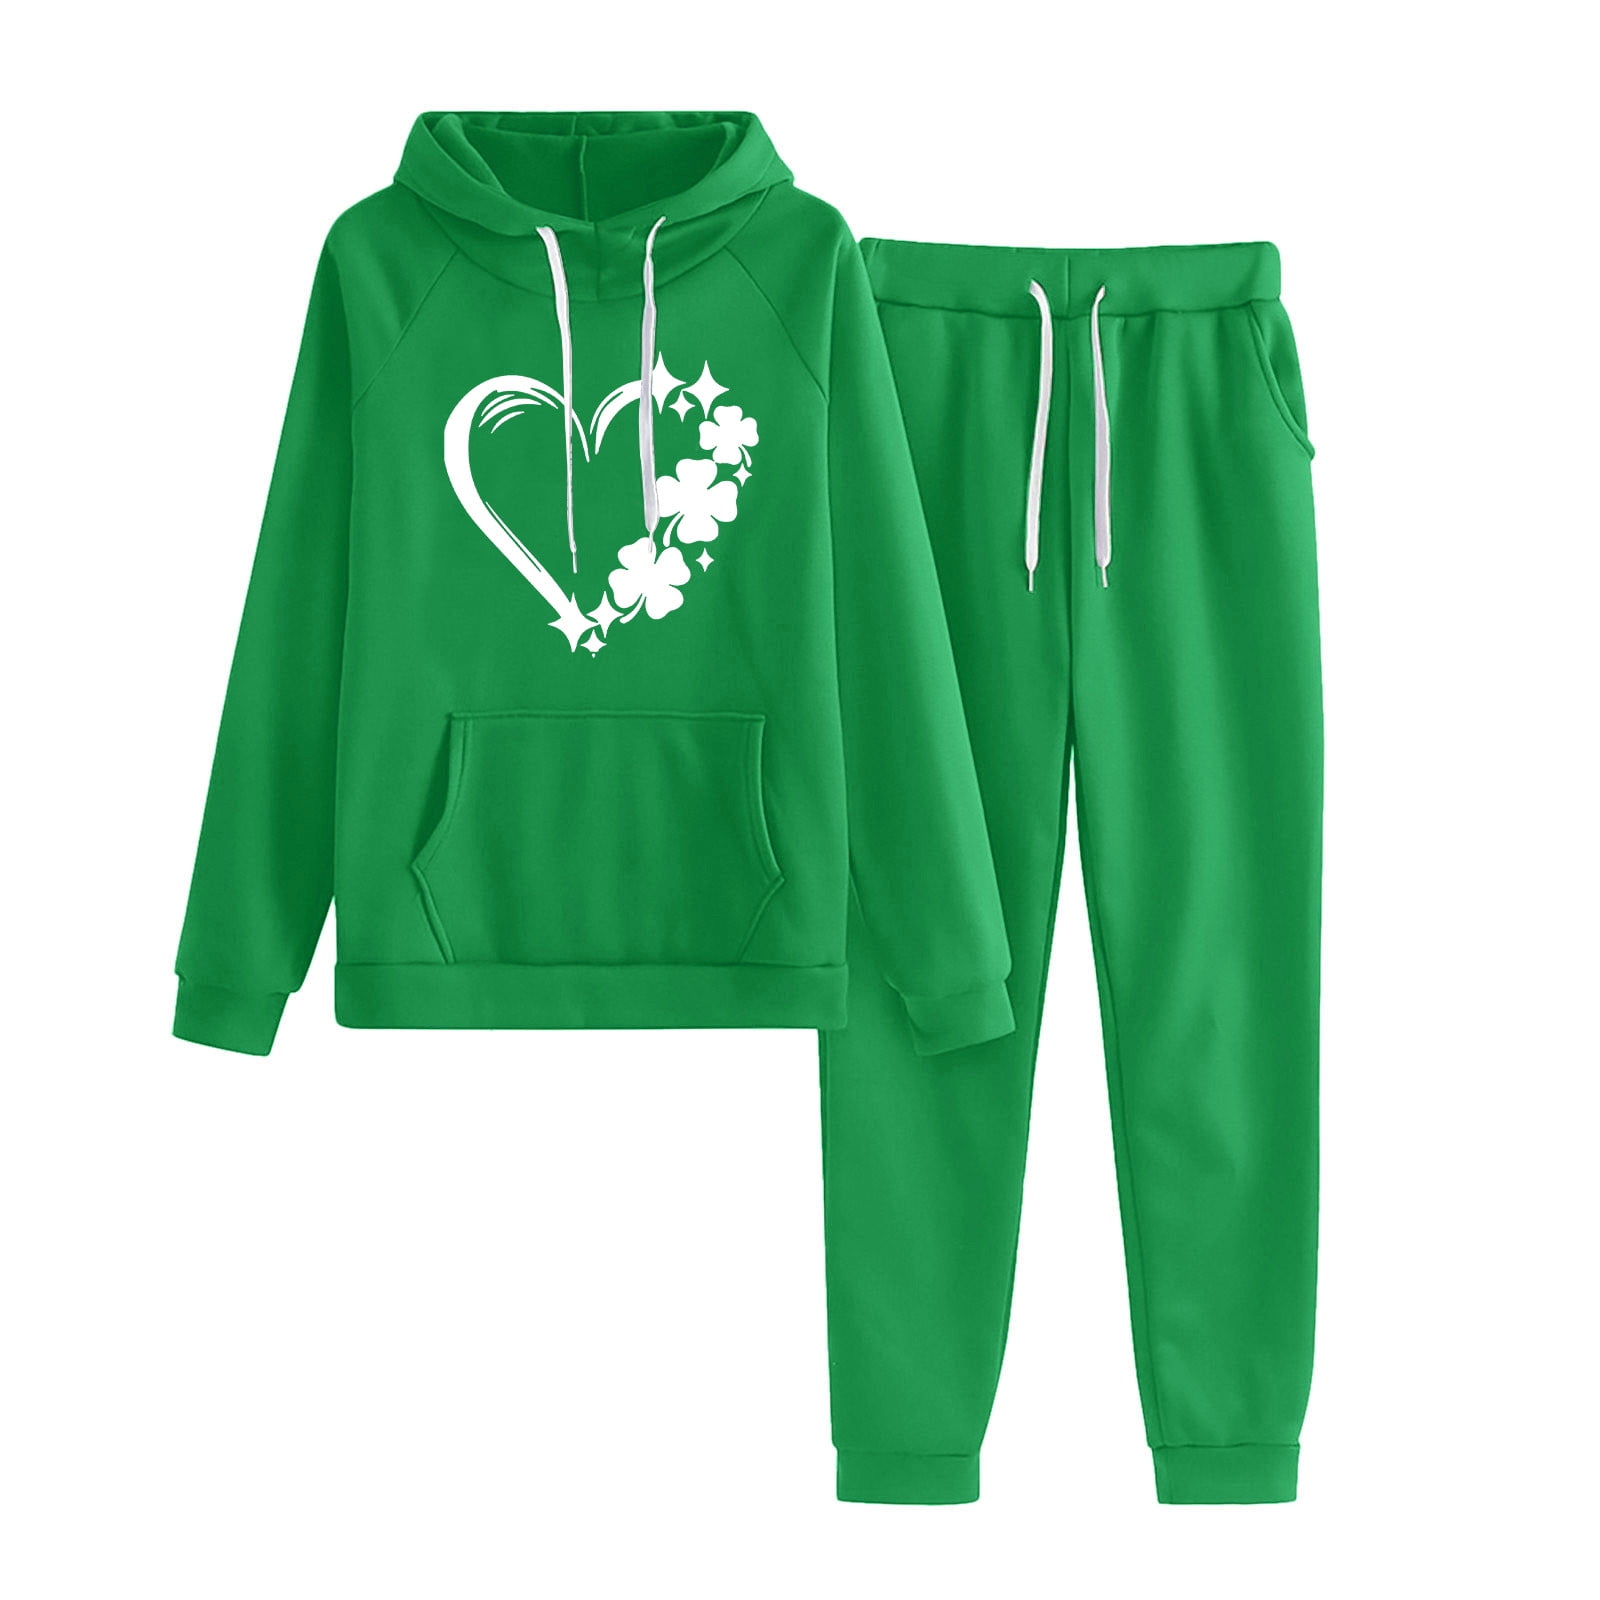 Posijego Womens St. Patrick's Day Sweatsuit Two Piece Outfit Sweatpants  Sweatshirt Hoodie Matching Set with Pockets 